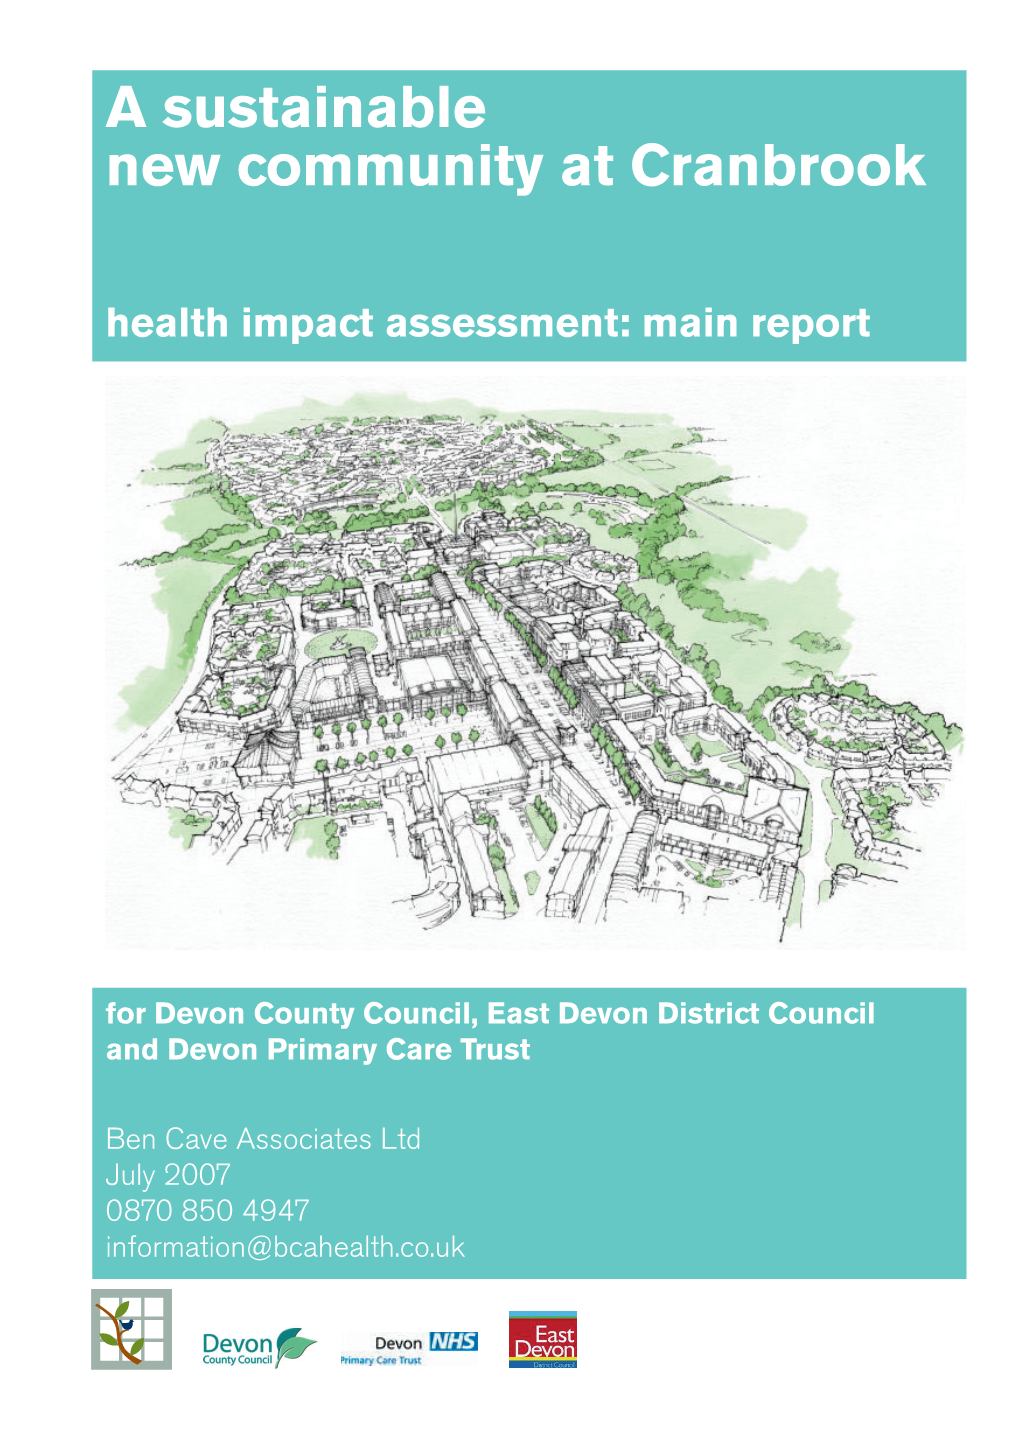 A Sustainable New Community at Cranbrook Health Impact Assessment: Main Report